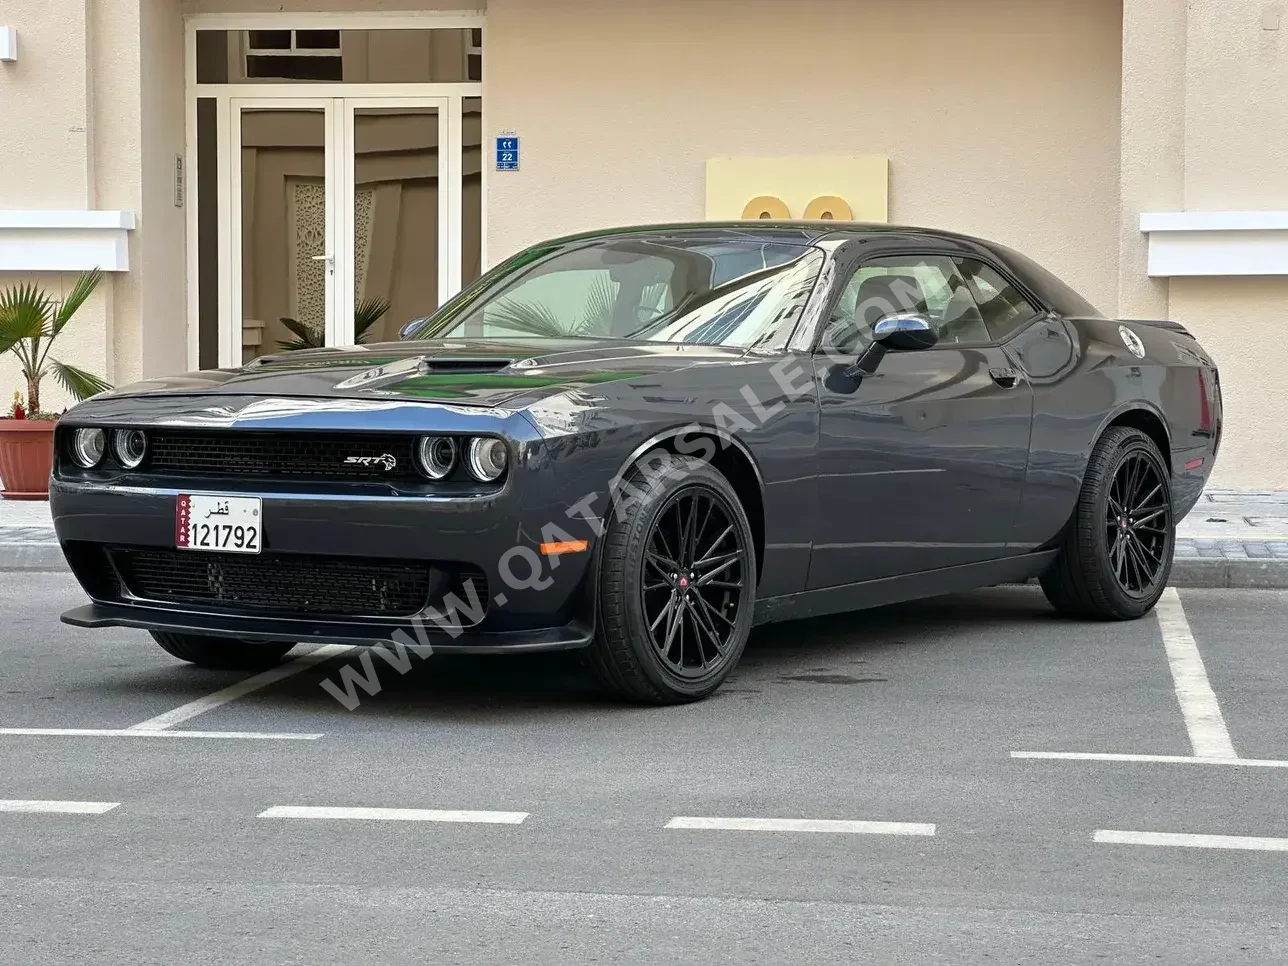 Dodge  Challenger  2019  Automatic  13,000 Km  6 Cylinder  Rear Wheel Drive (RWD)  Coupe / Sport  Gray